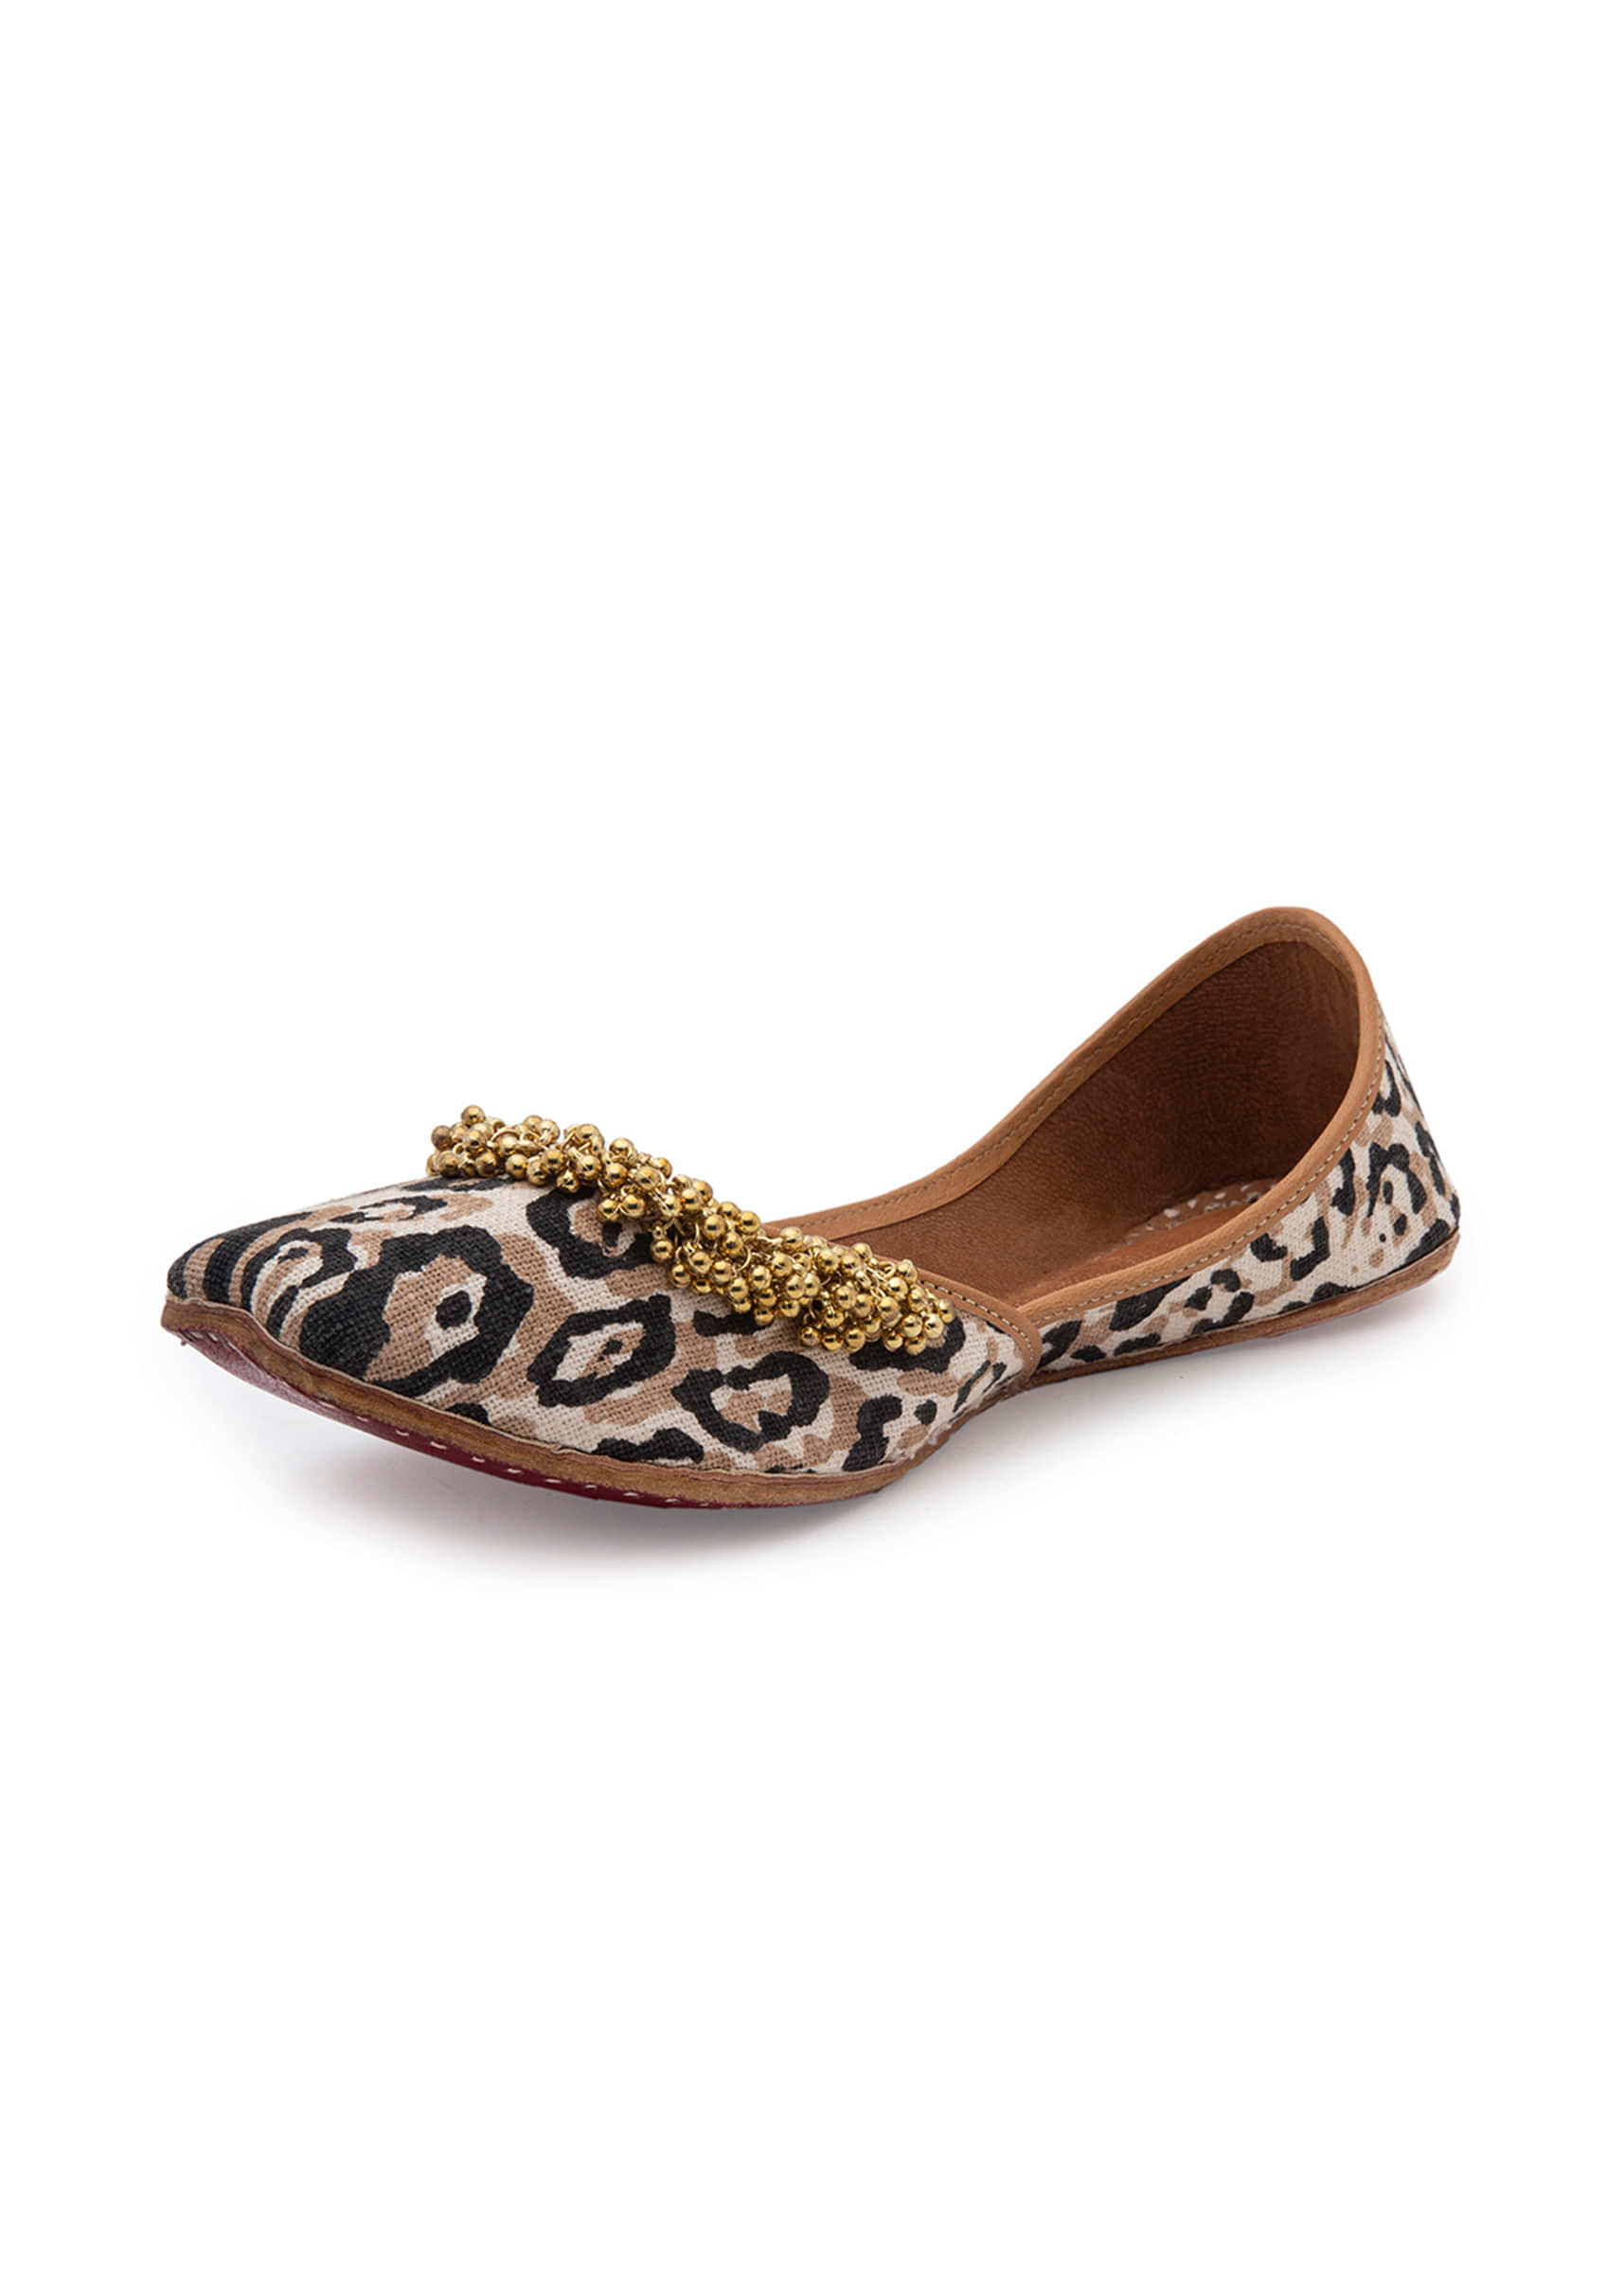 Multi Colored Juttis In Jacquard With Animal Print Design And Tiny Ghungroos By 5 Elements